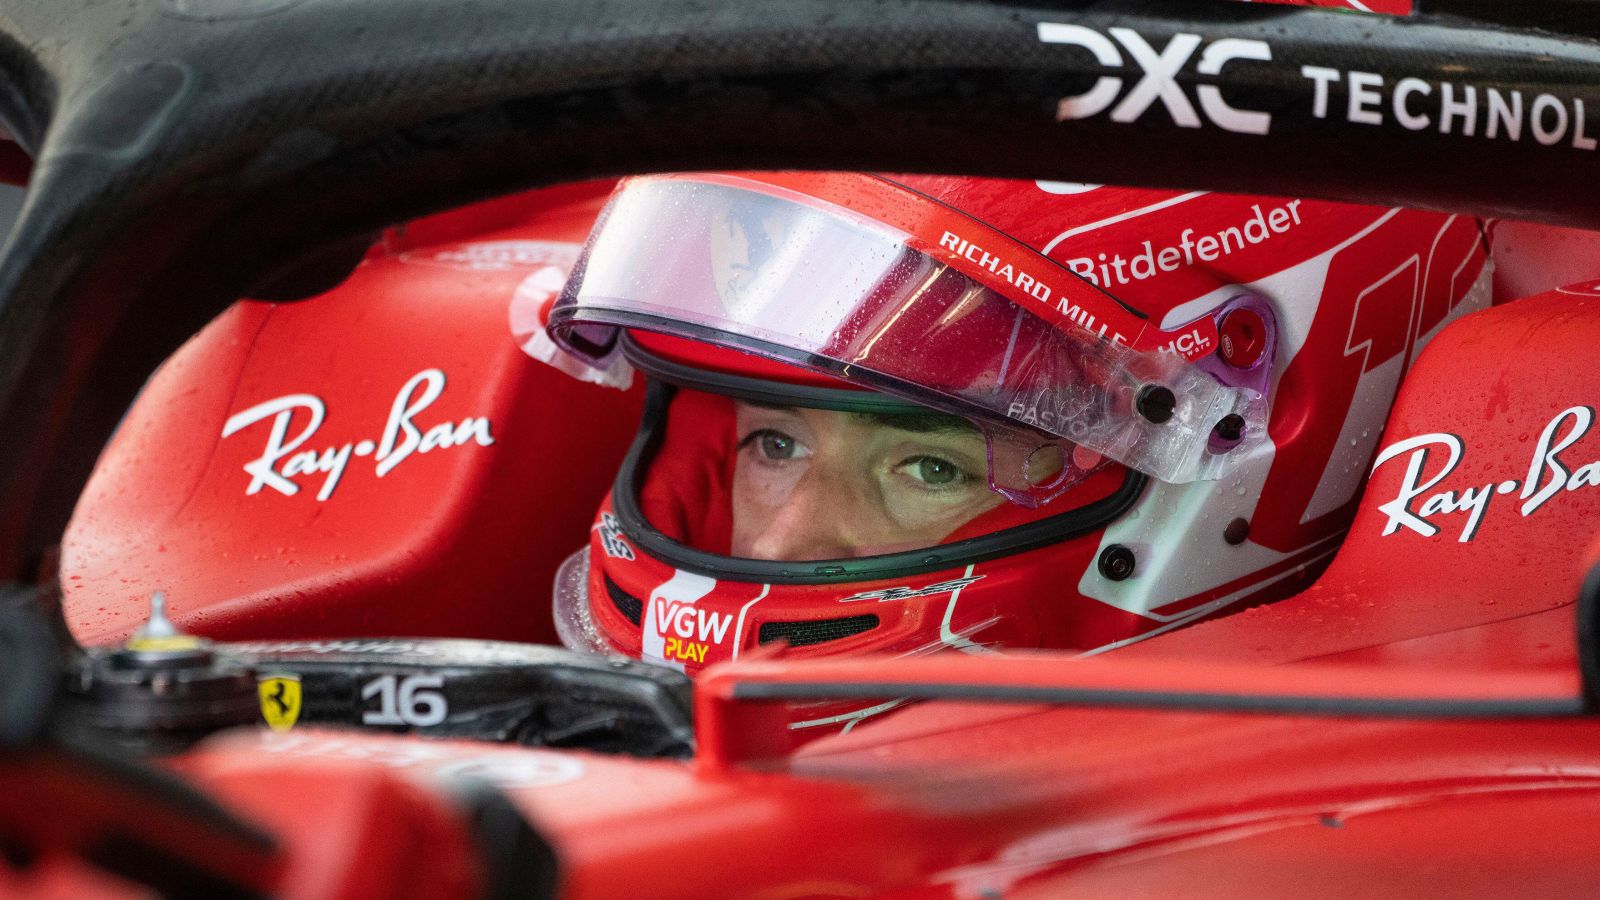 Charles Leclerc confirms Red Bull fears with impressive Ferrari practice pace PlanetF1